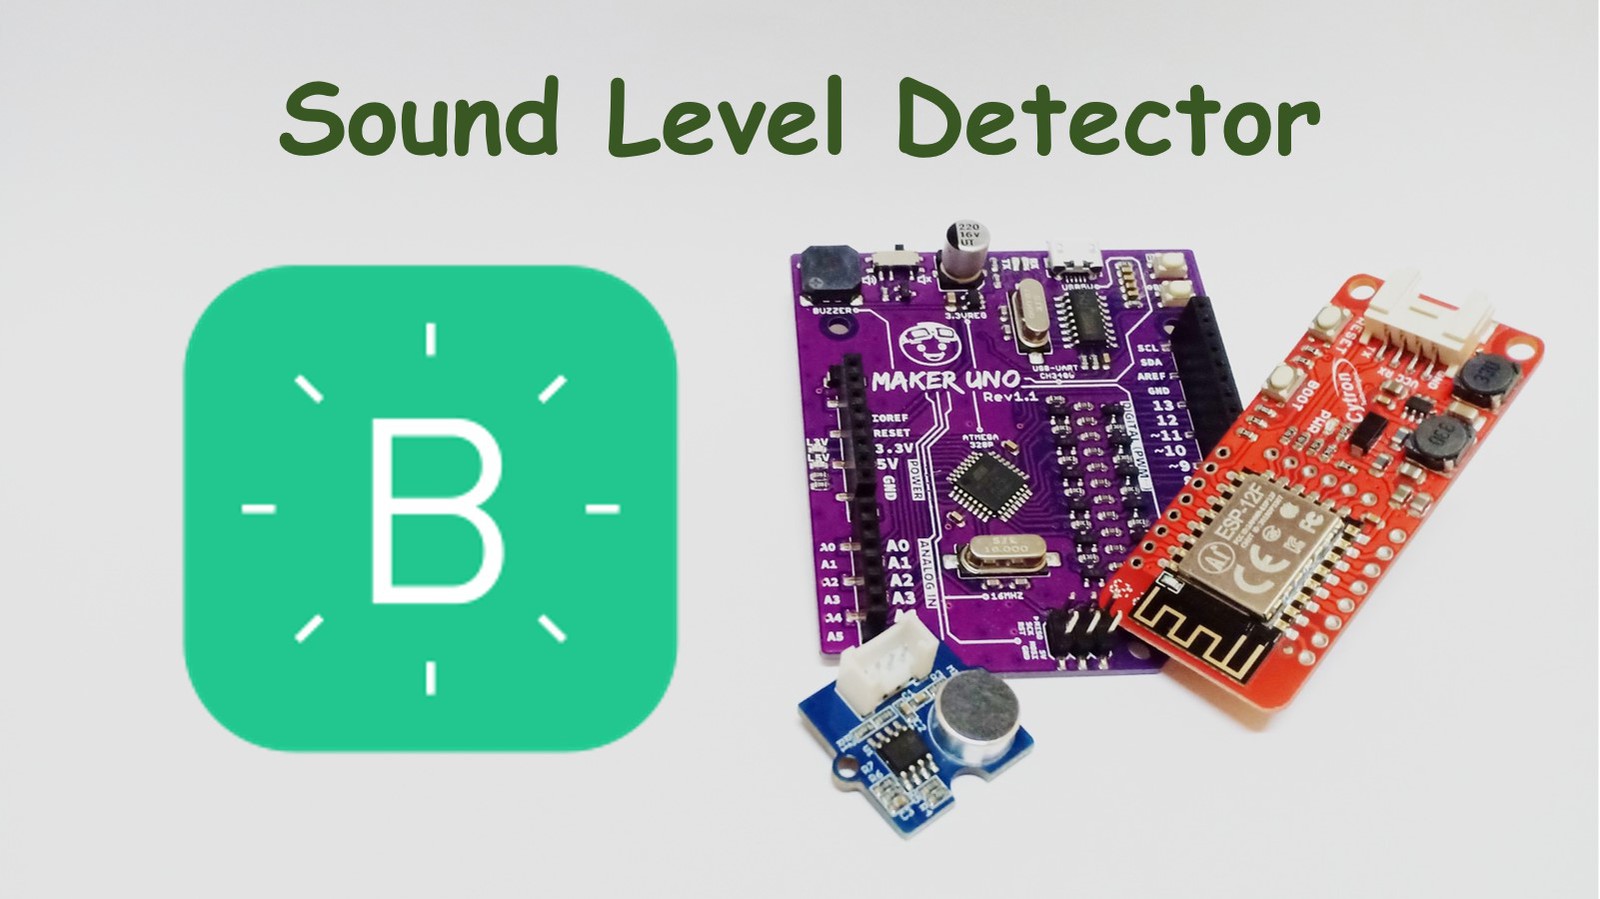 Sound Level Detector using Maker UNO paired with ESP8266 Grove WiFi on Blynk